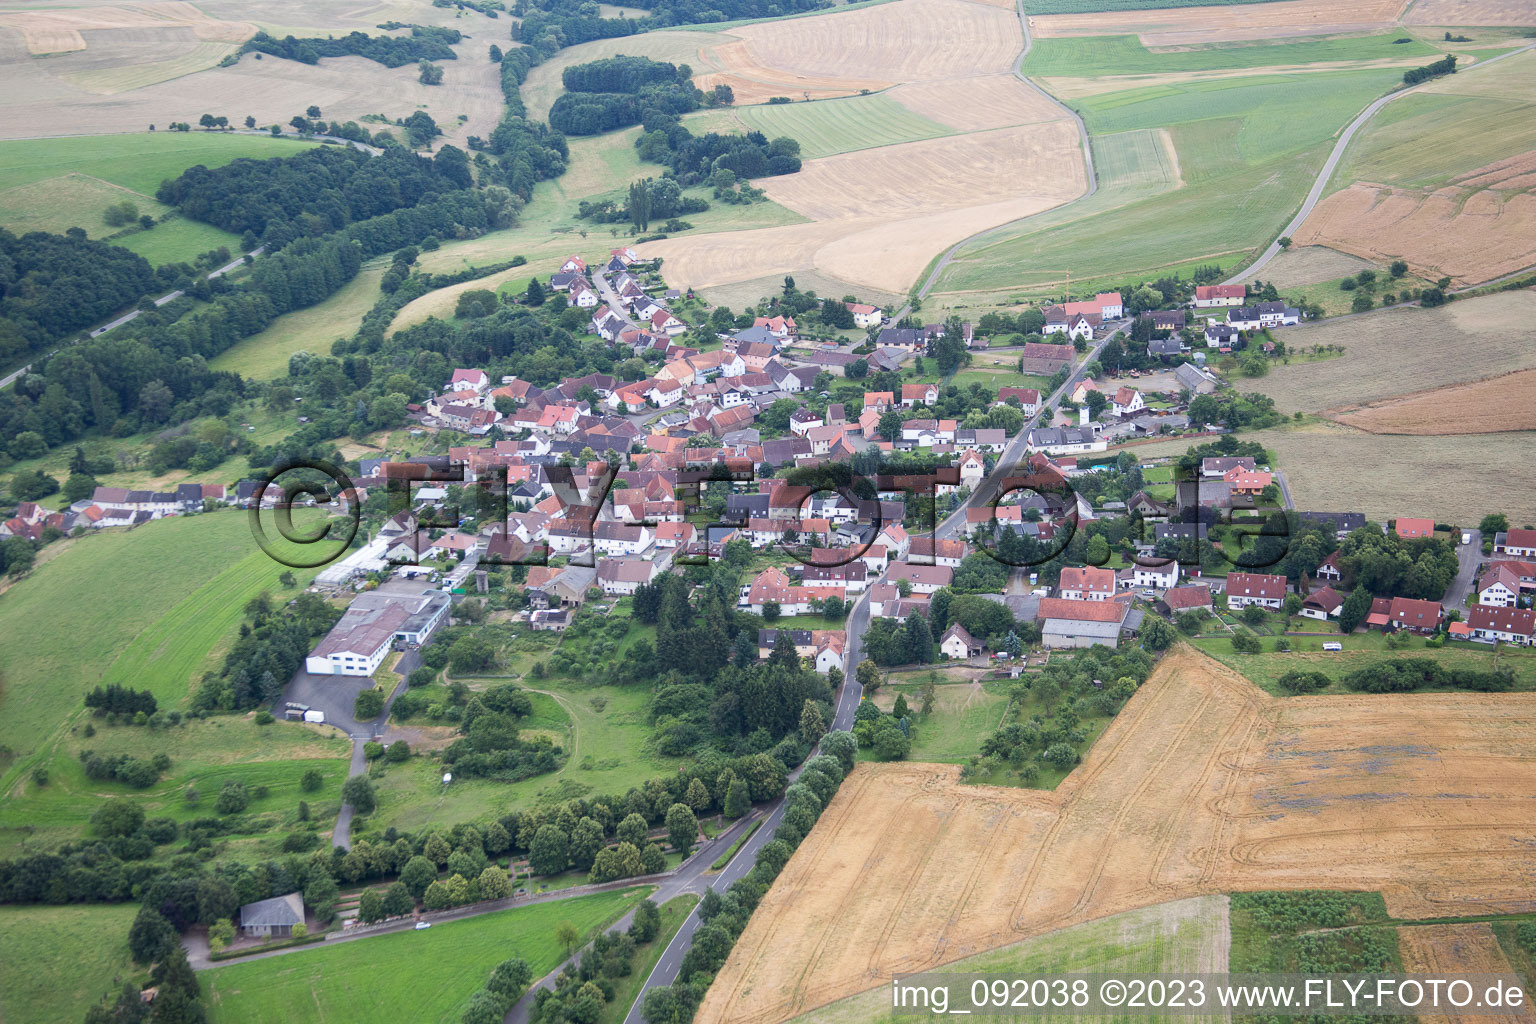 Aerial view of Einöllen in the state Rhineland-Palatinate, Germany